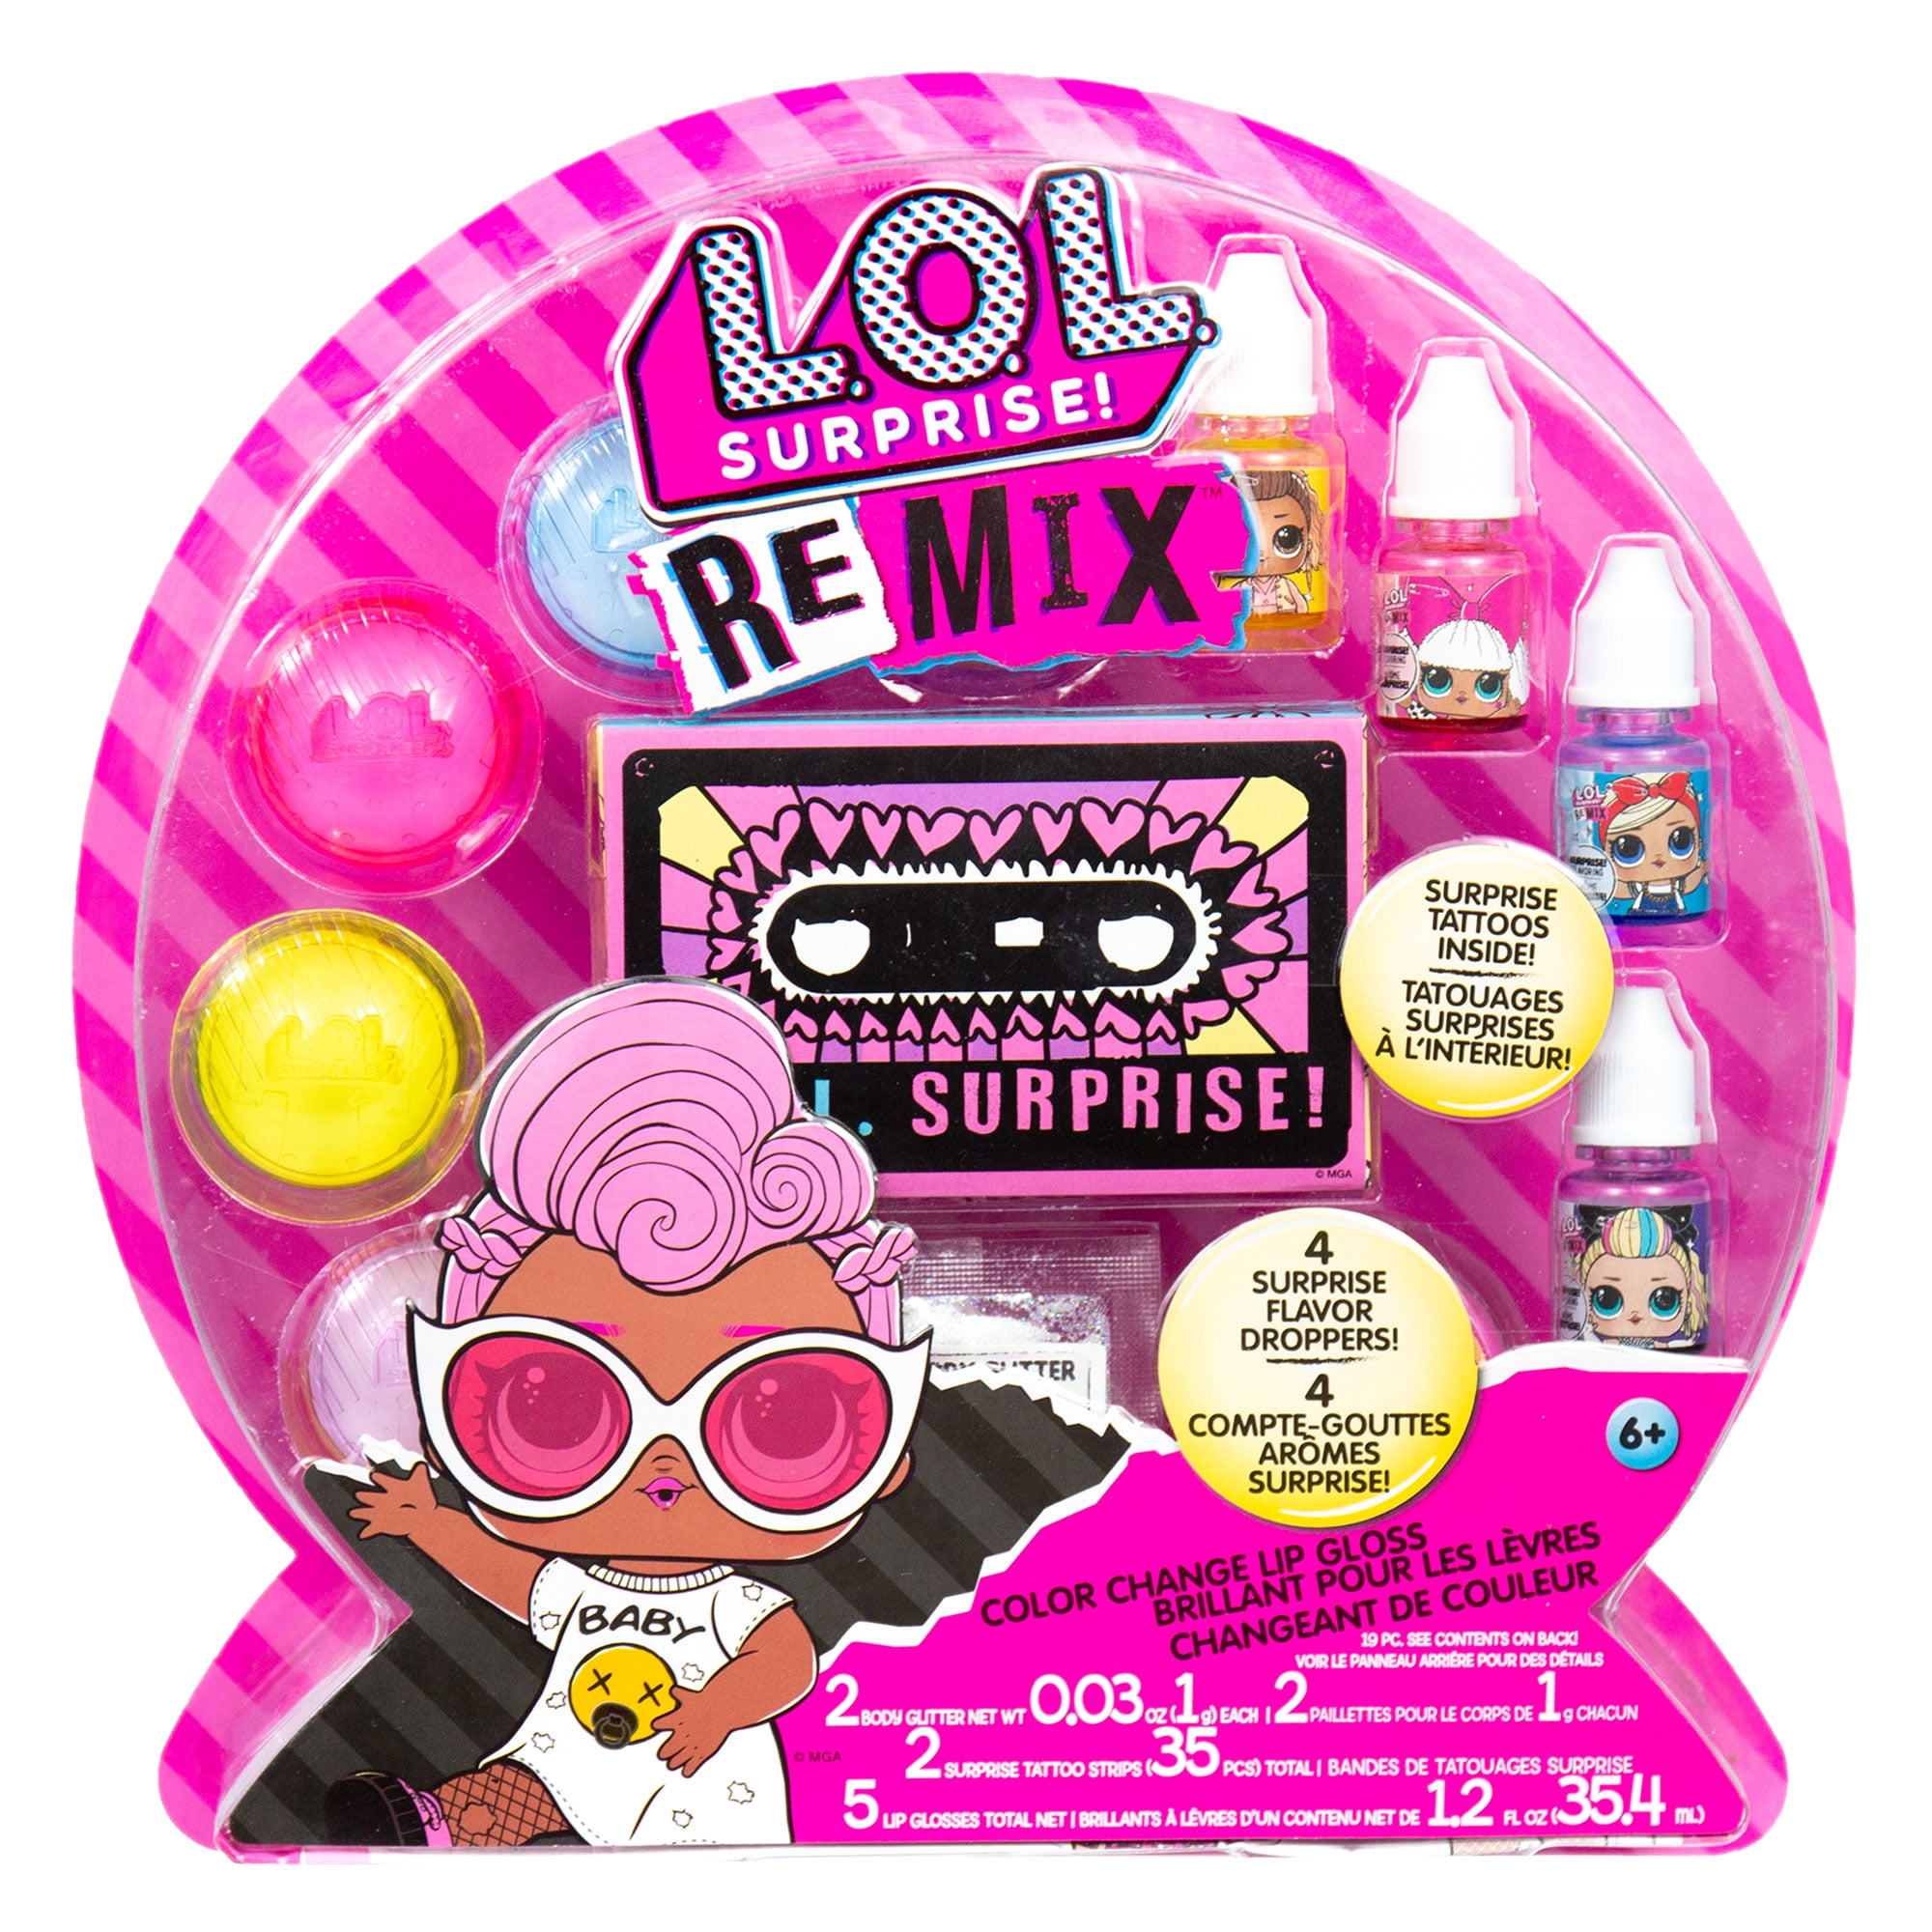 Fun LOL Surprise 5 Color Change Lip Gloss Kit With Accessory Gift Inside for Kid for sale online 